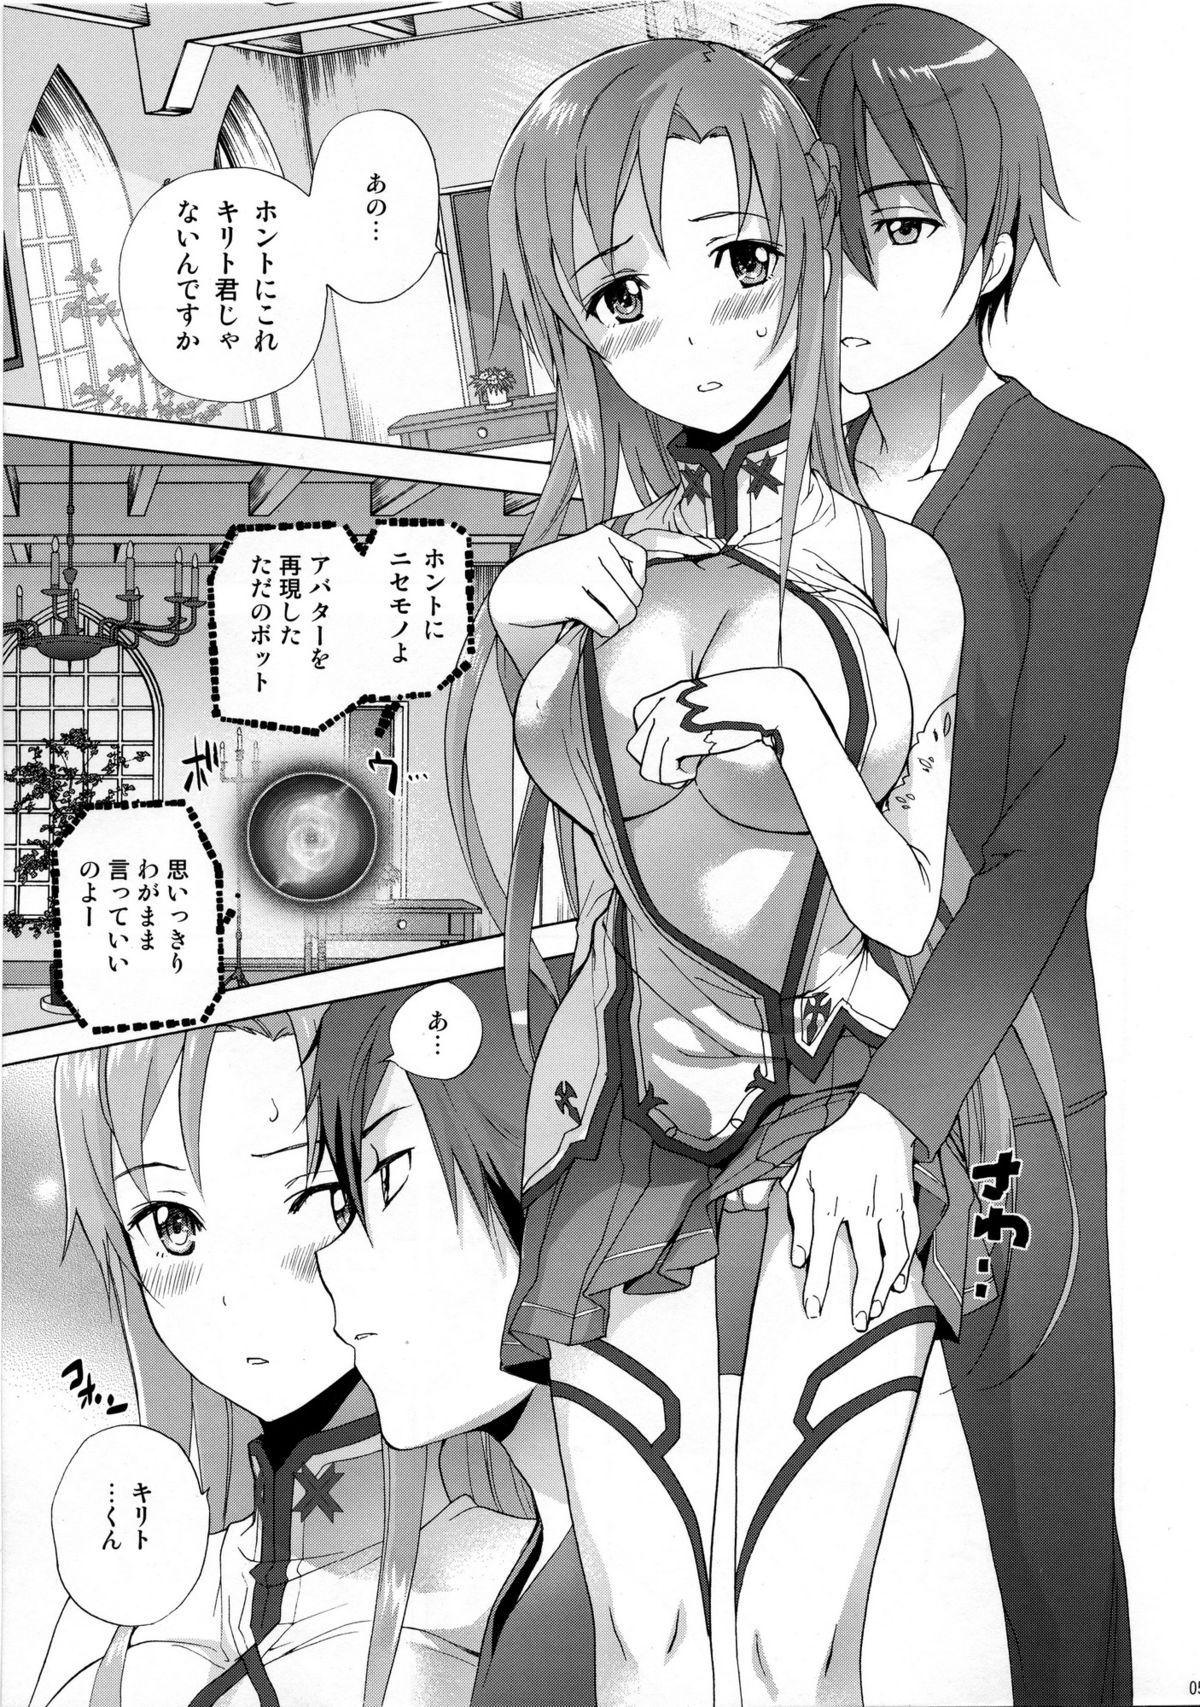 Footjob ASUNA' HOLE - Sword art online Whipping - Page 4